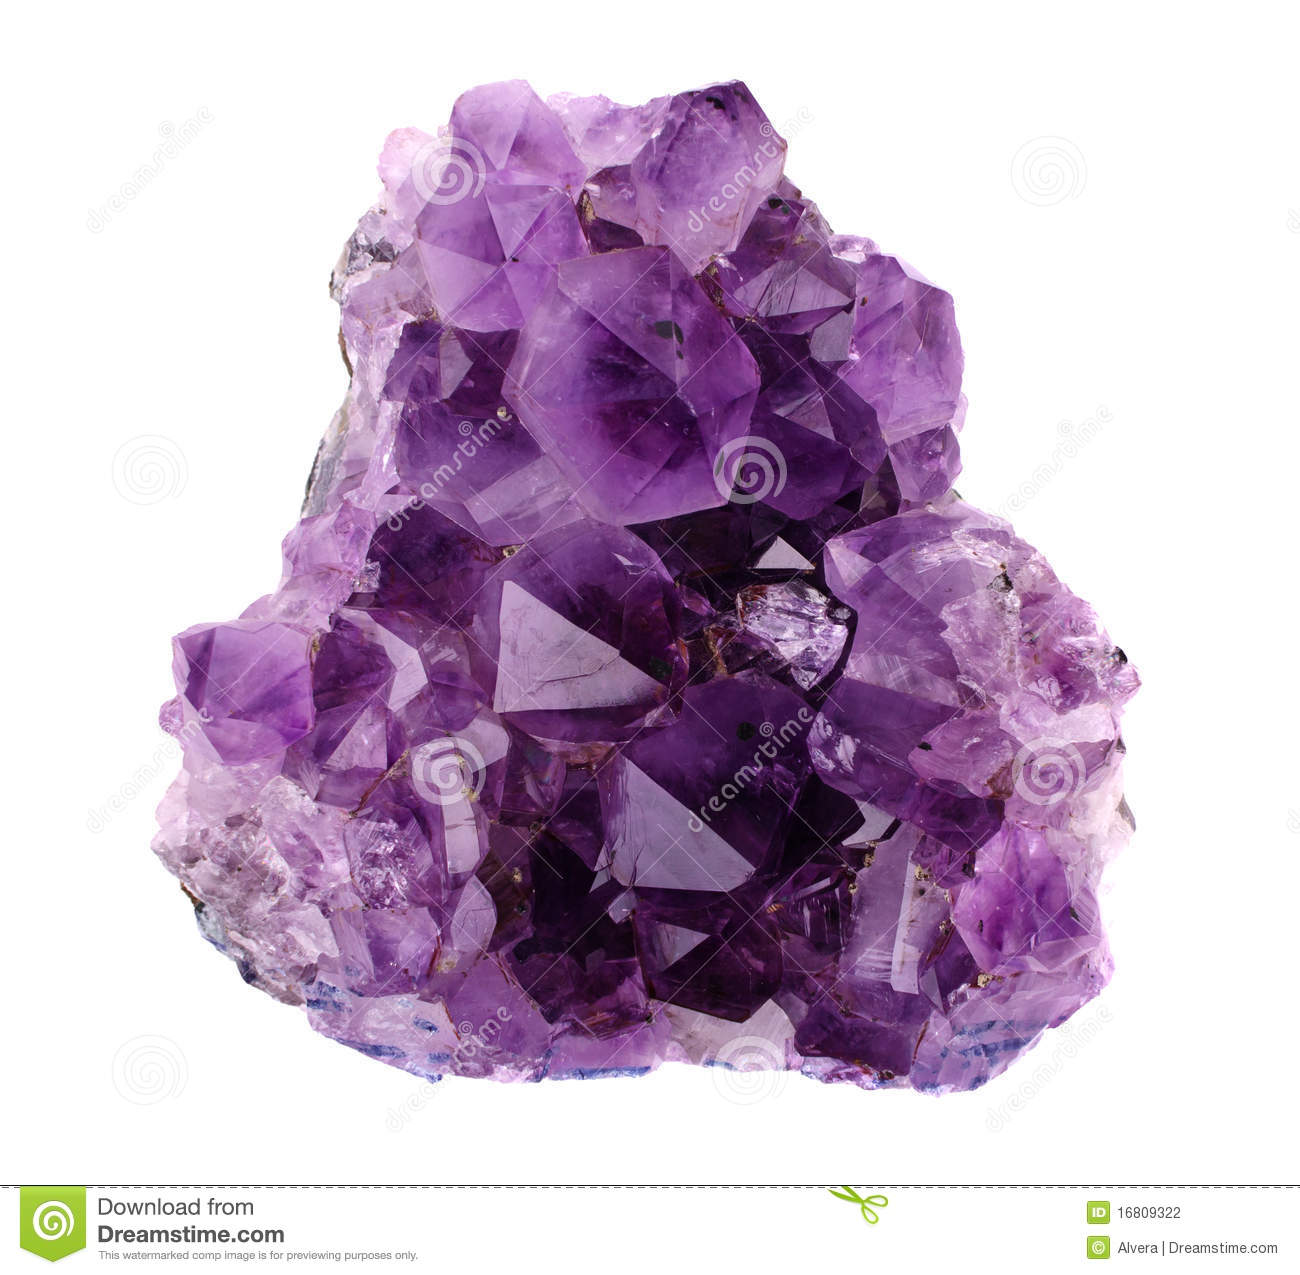 Amethyst Violet Variety Of Quartz Used In Jewelry Industry And